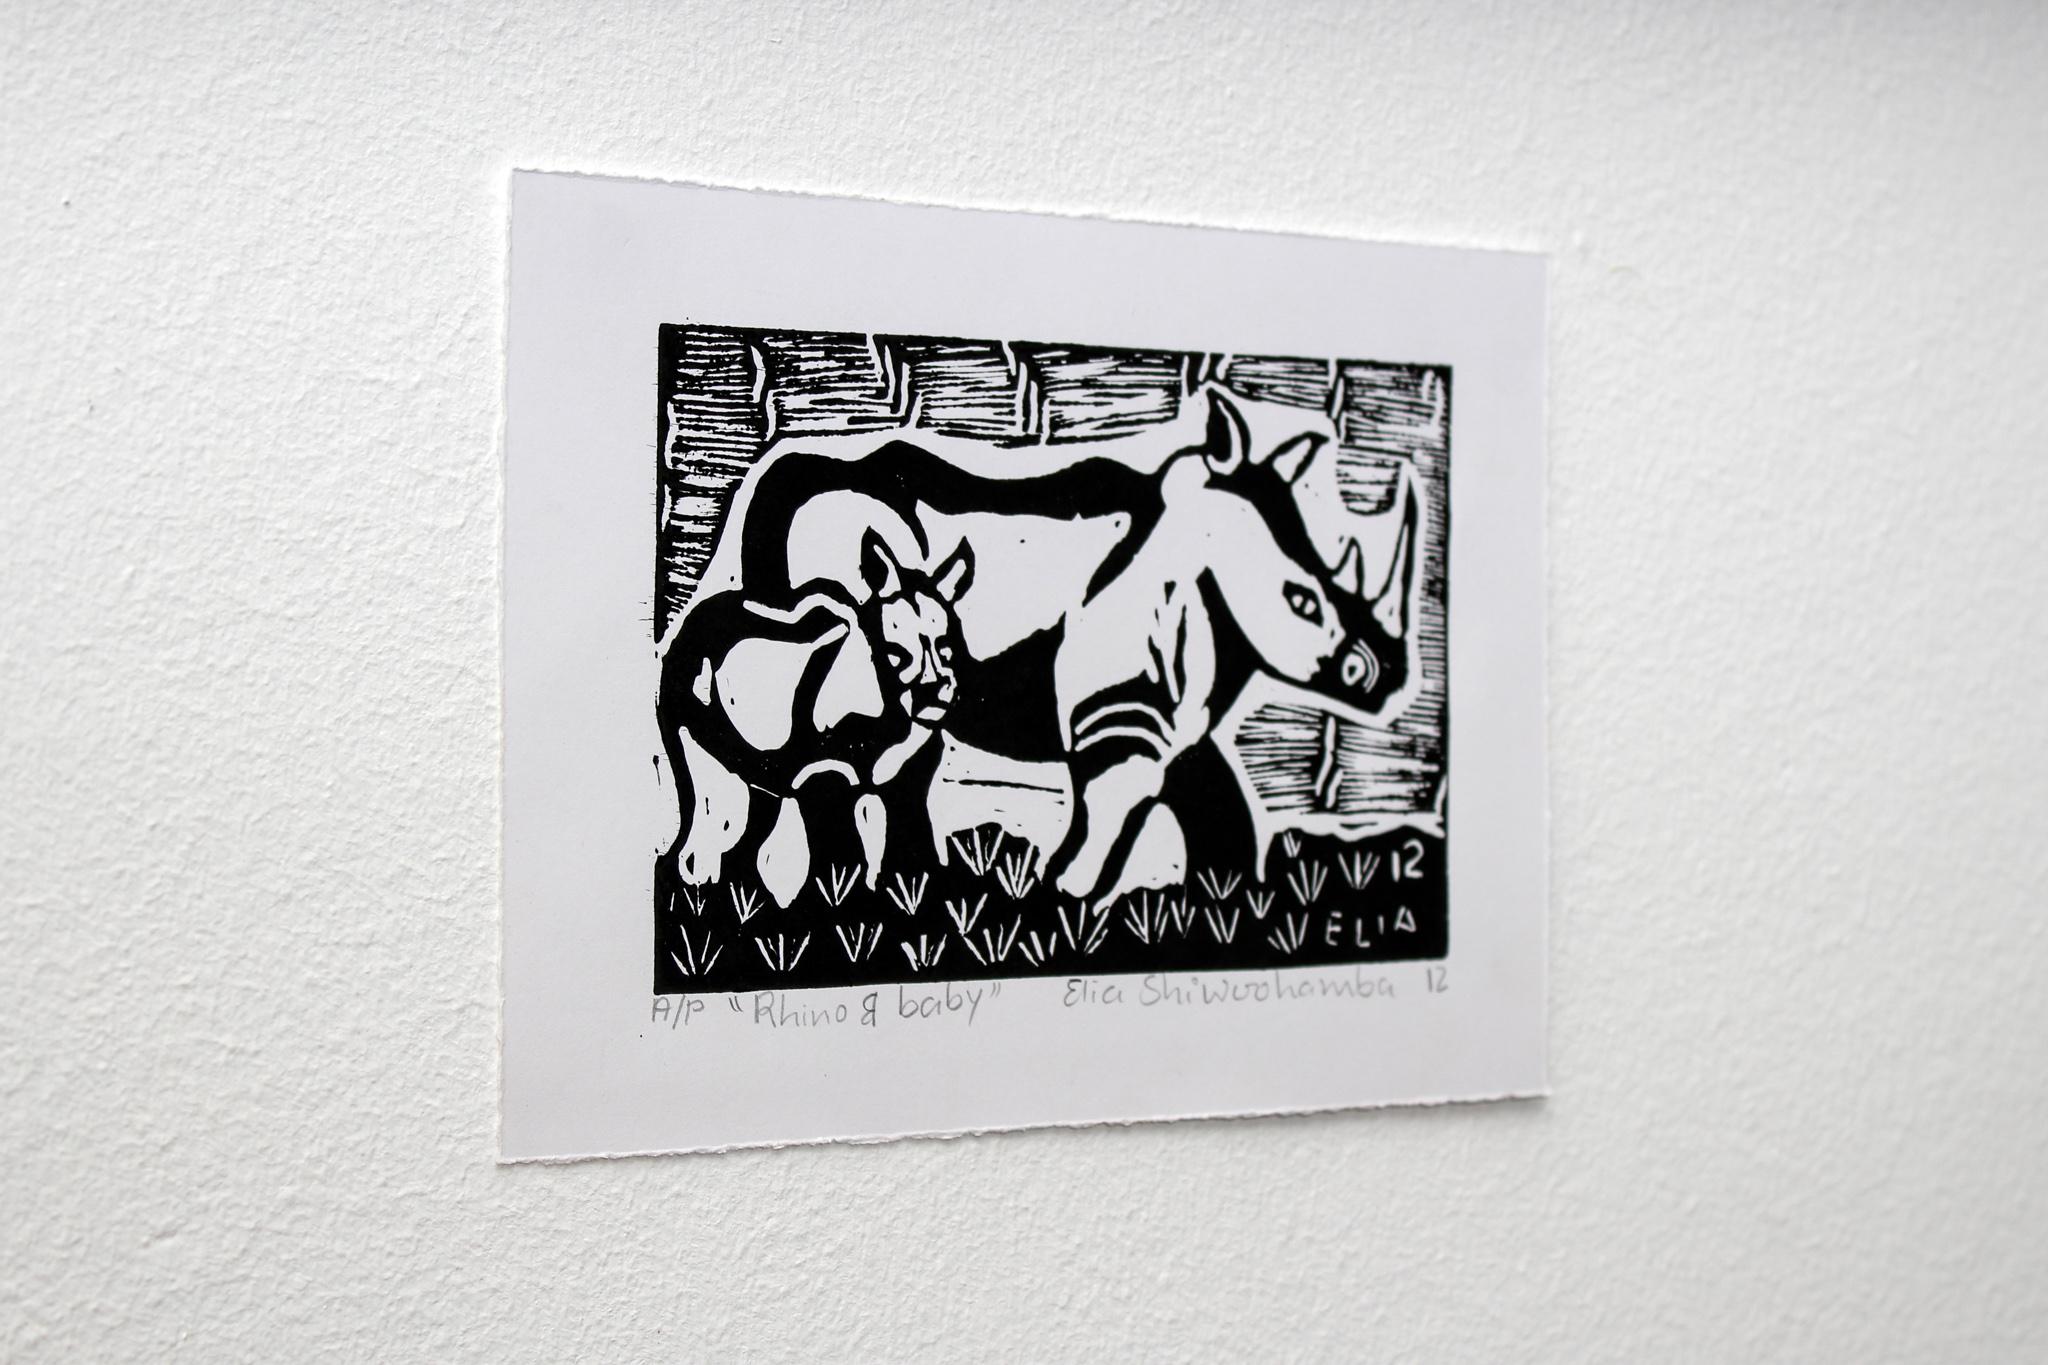 Rhino and baby, Linoleum block prints on paper.

Elia Shiwoohamba was born in 1981 in Windhoek, Namibia. He graduated from the John Muafangejo Art Centre in Windhoek in 2006. Specialising in printmaking and sculpture, Shiwoohamba works as a